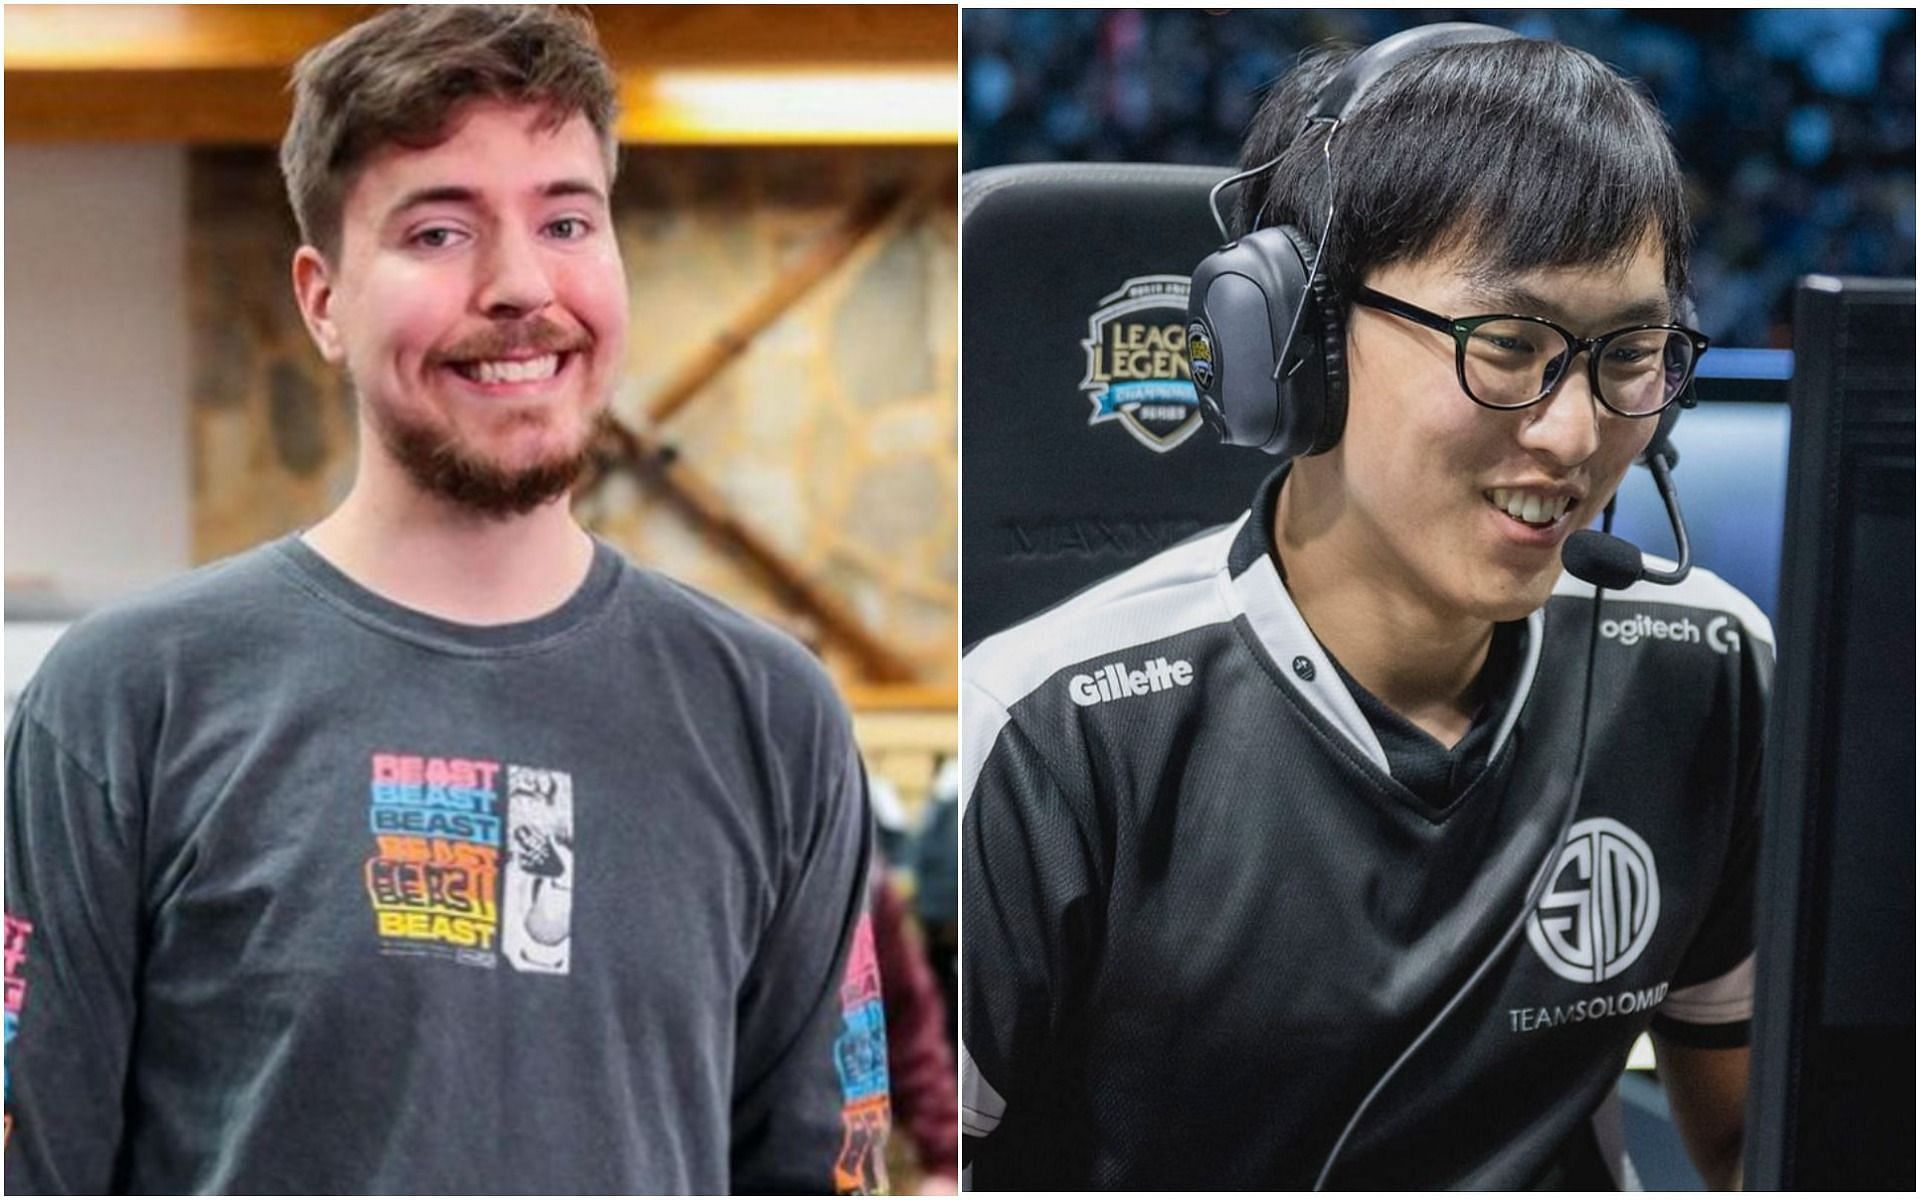 Fans might see Doublelift and MrBeast join hands to create a potential League of Legends super team (Image via MrBeast and League of Legends)